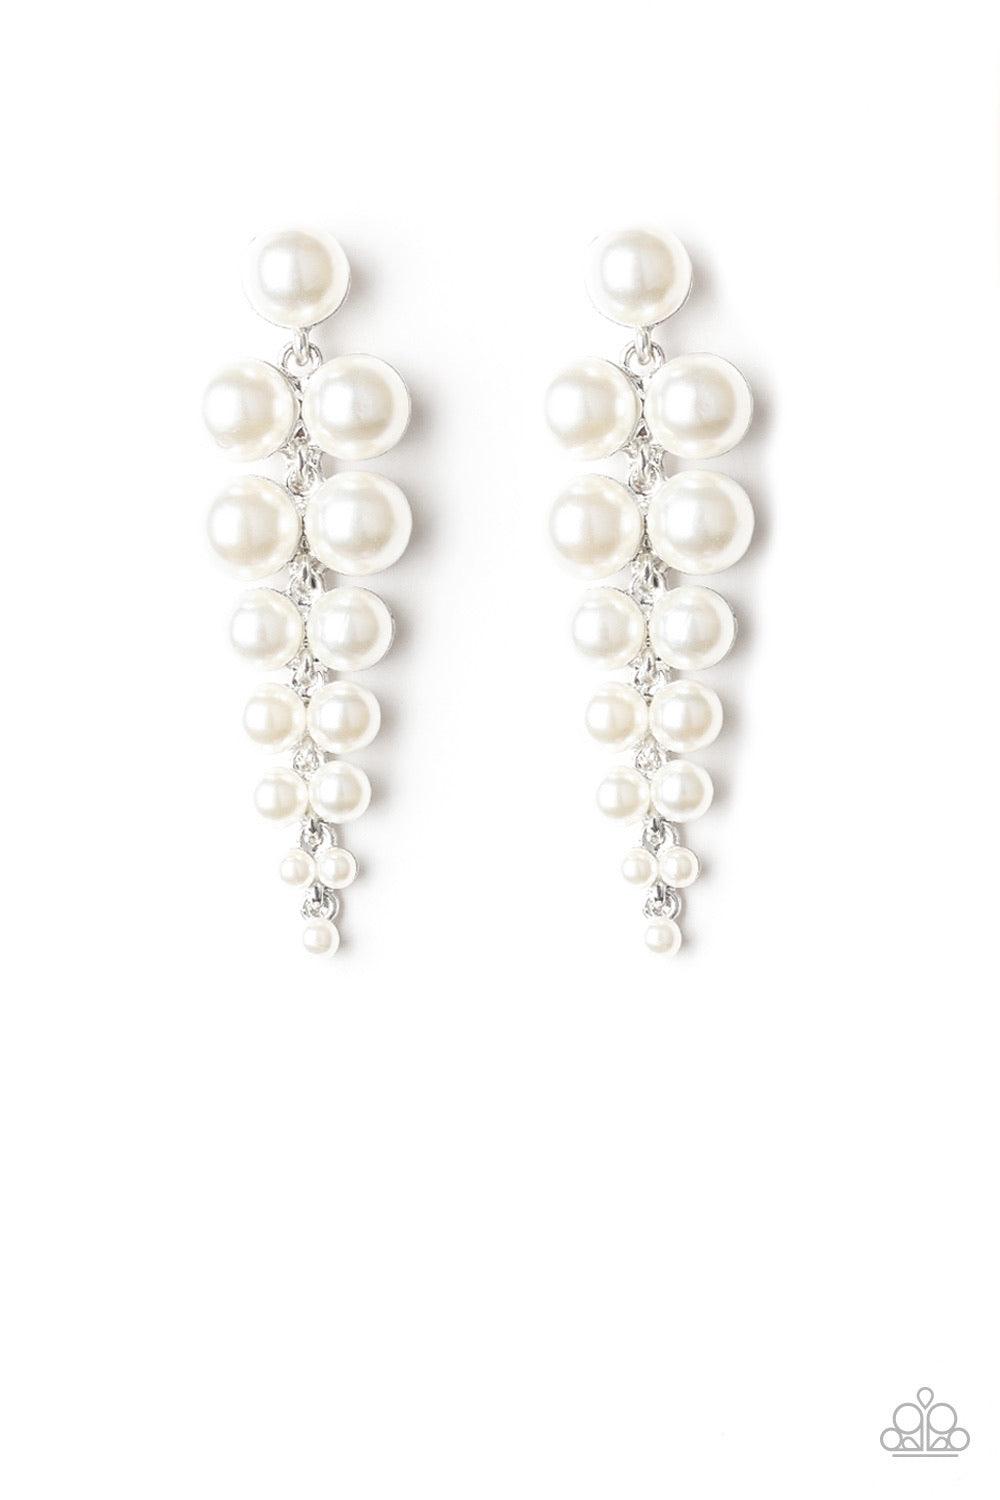 Paparazzi Accessories Totally TriBeCa - White Gradually decreasing in size, pairs of classic white pearls drip from a solitaire pearl, coalescing into a dramatic triangular-shaped lure. Earring attaches to a standard post fitting. Jewelry